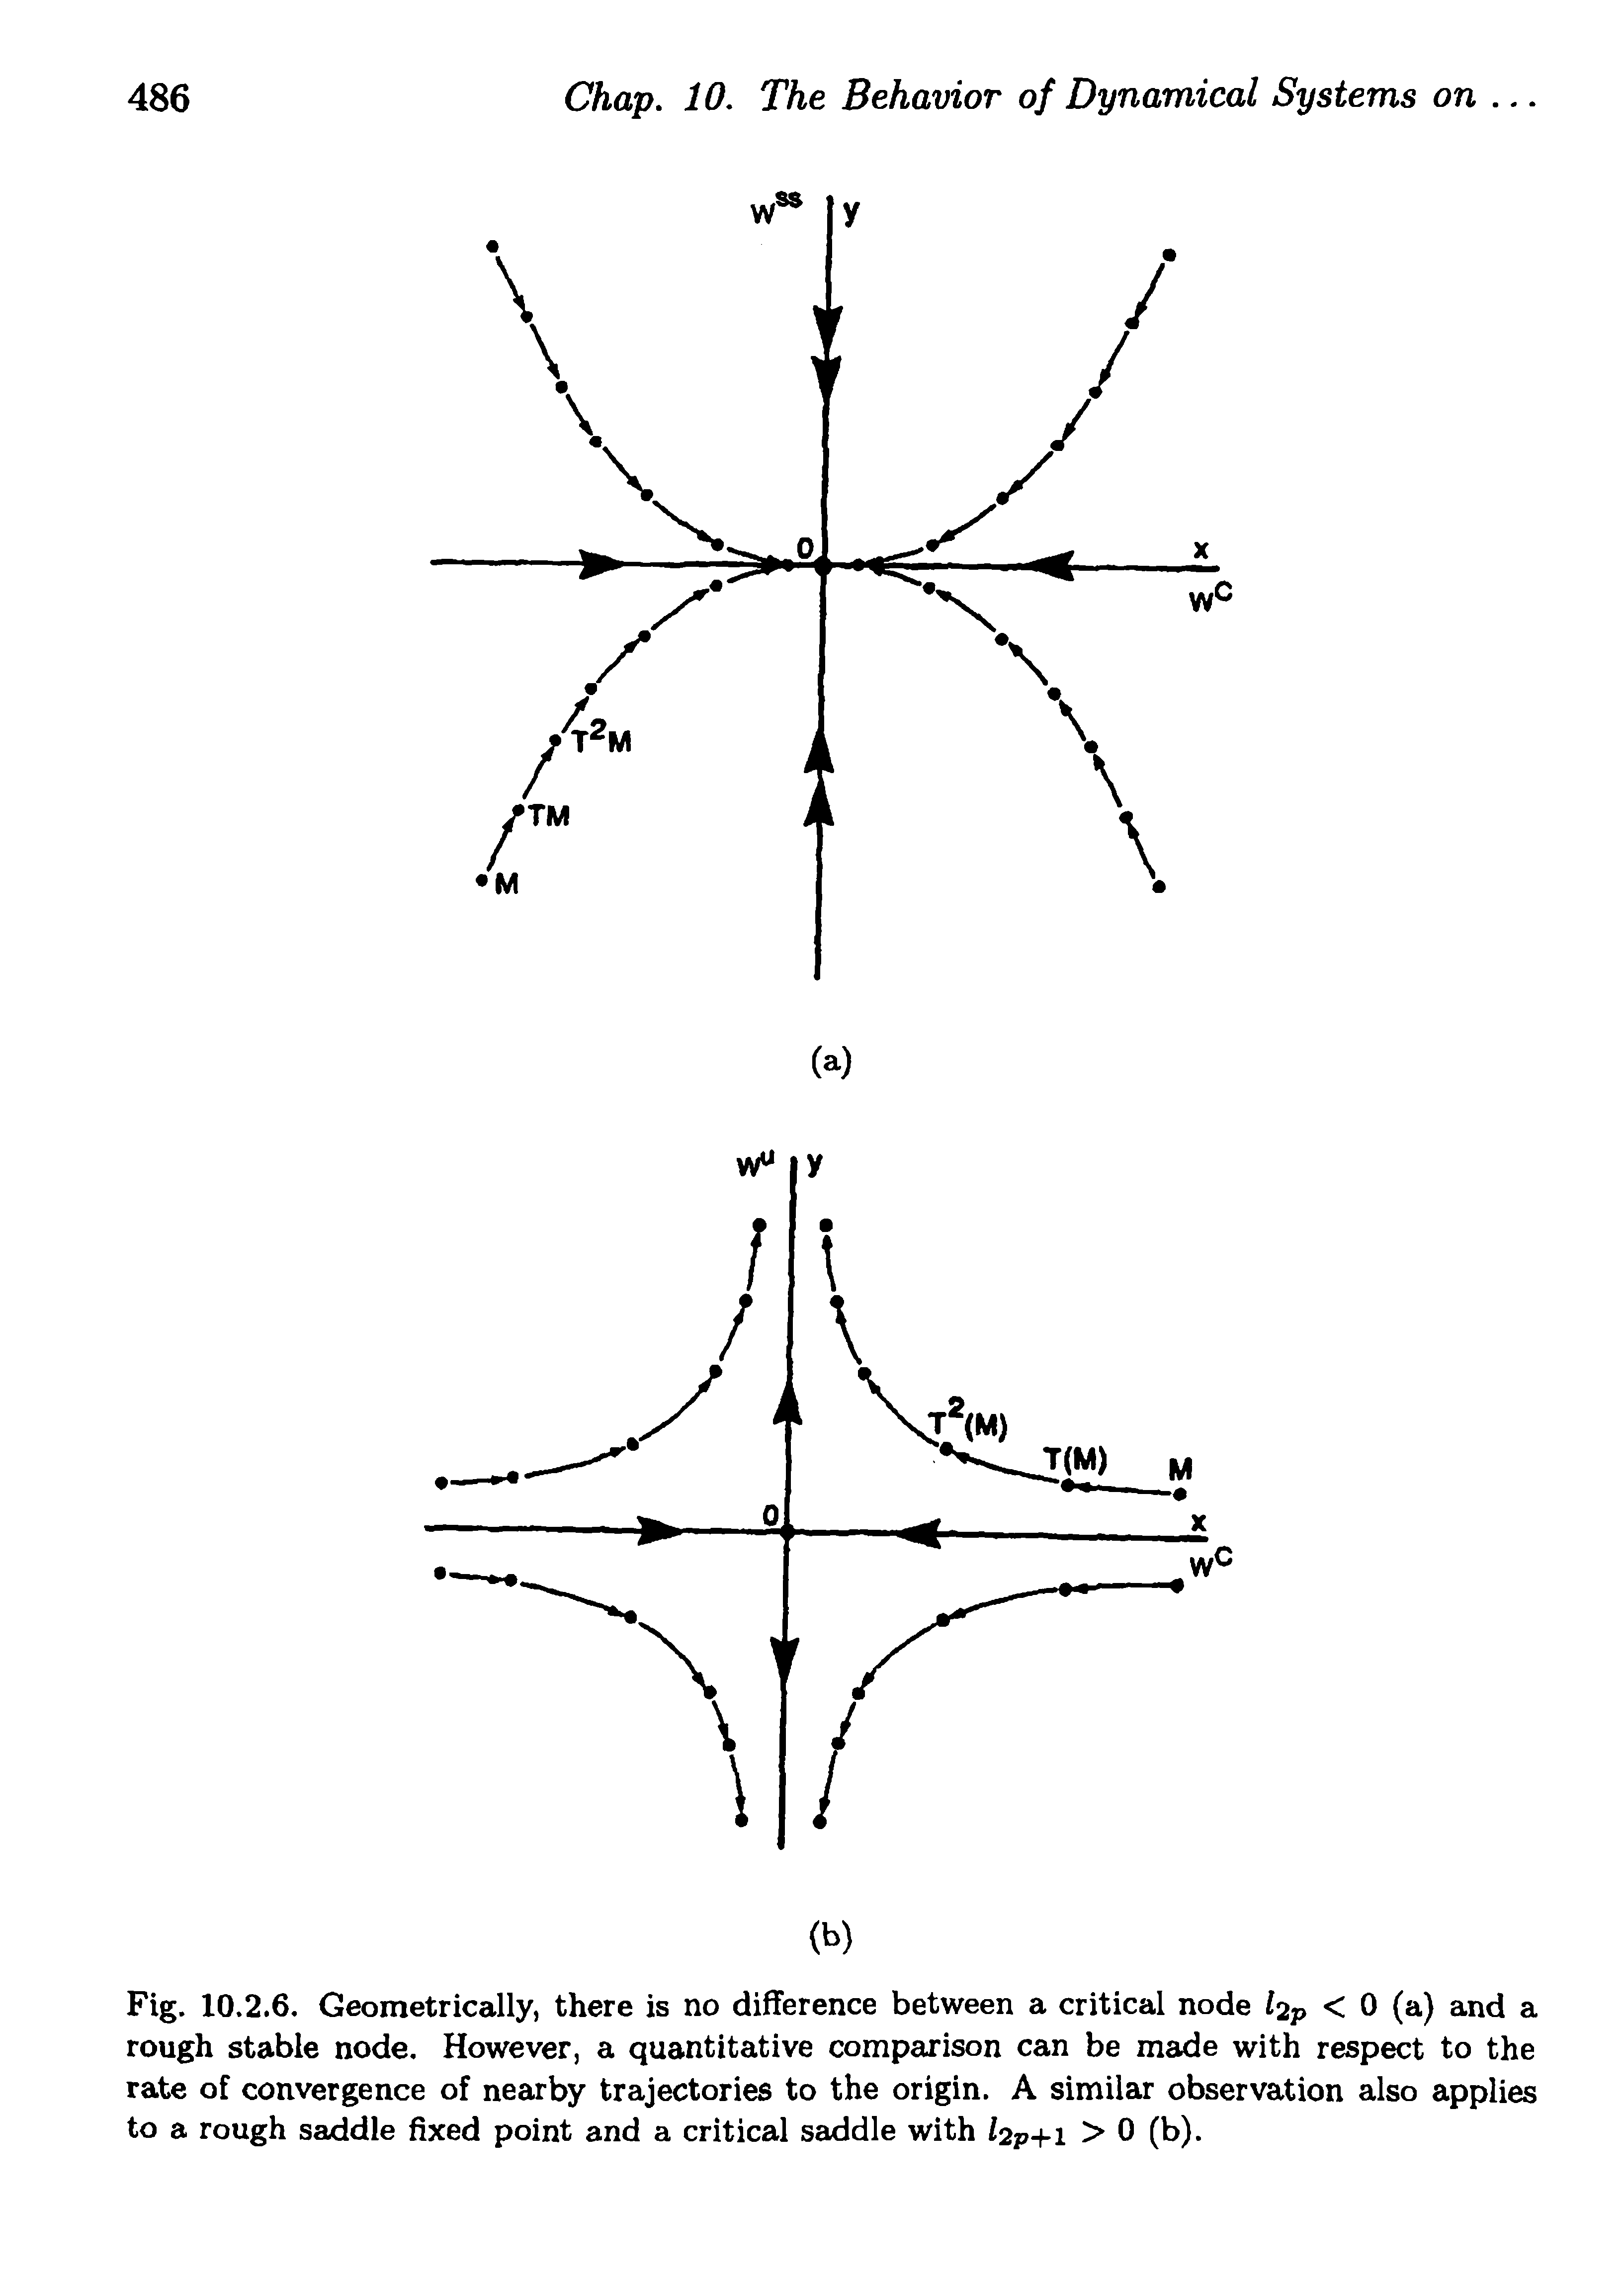 Fig. 10.2.6. Geometrically, there is no difference between a critical node hp < 0 (a) and a rough stable node. However, a quantitative comparison can be made with respect to the rate of convergence of nearby trajectories to the origin. A similar observation also applies to a rough saddle fixed point and a critical saddle with /2p+i >0 (b).